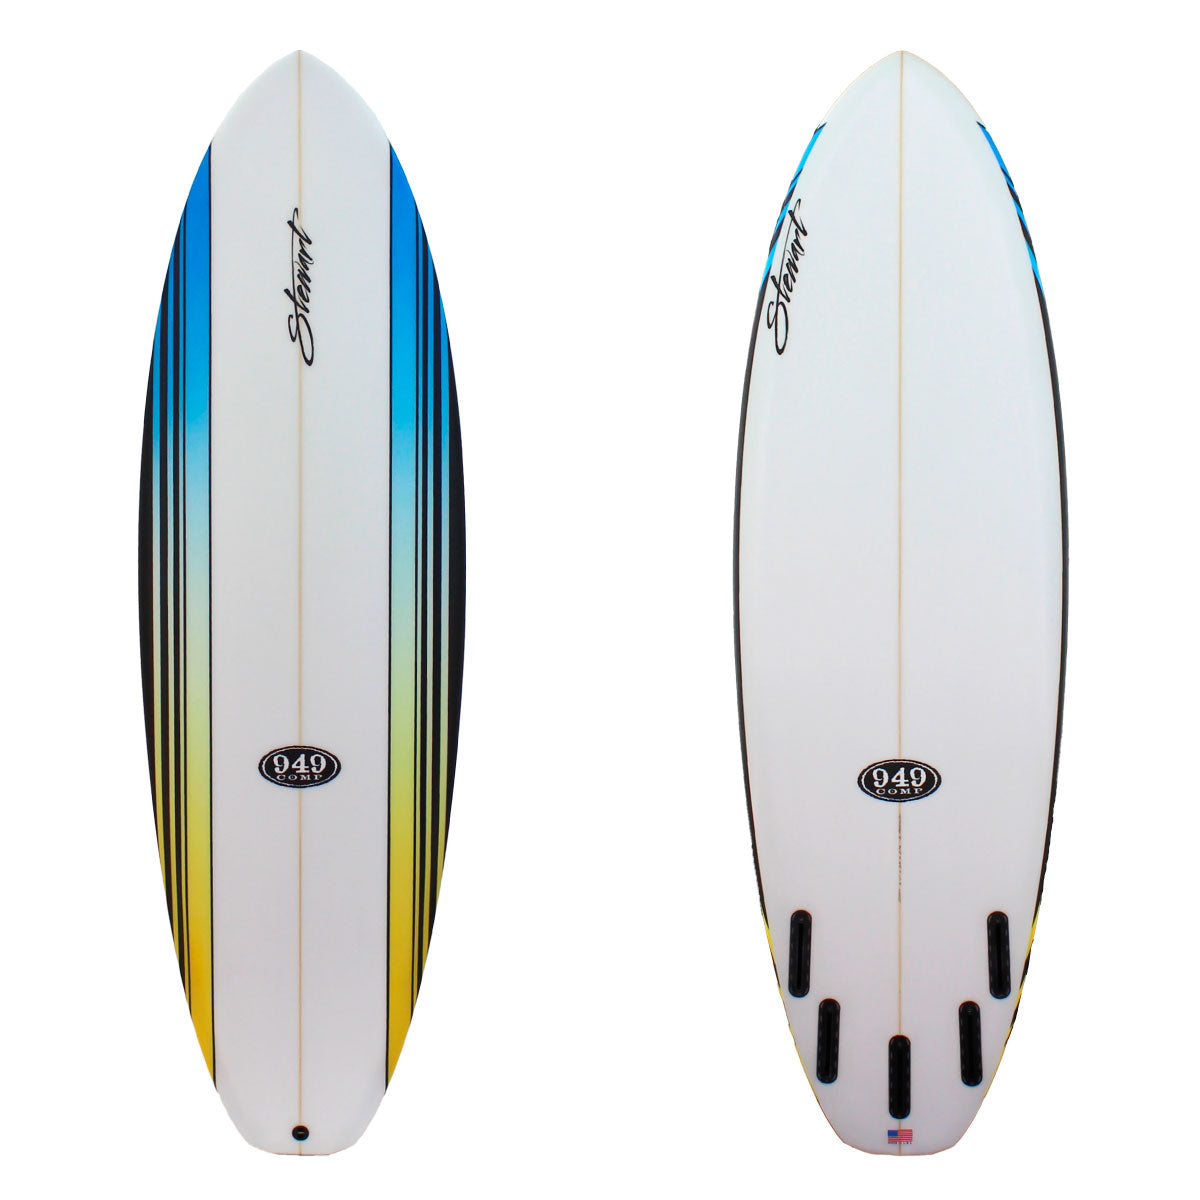 Stewart Surfboards 6'0" 949-Comp with blue fade to yellow stripes and black stripes on deck and clear white bottom